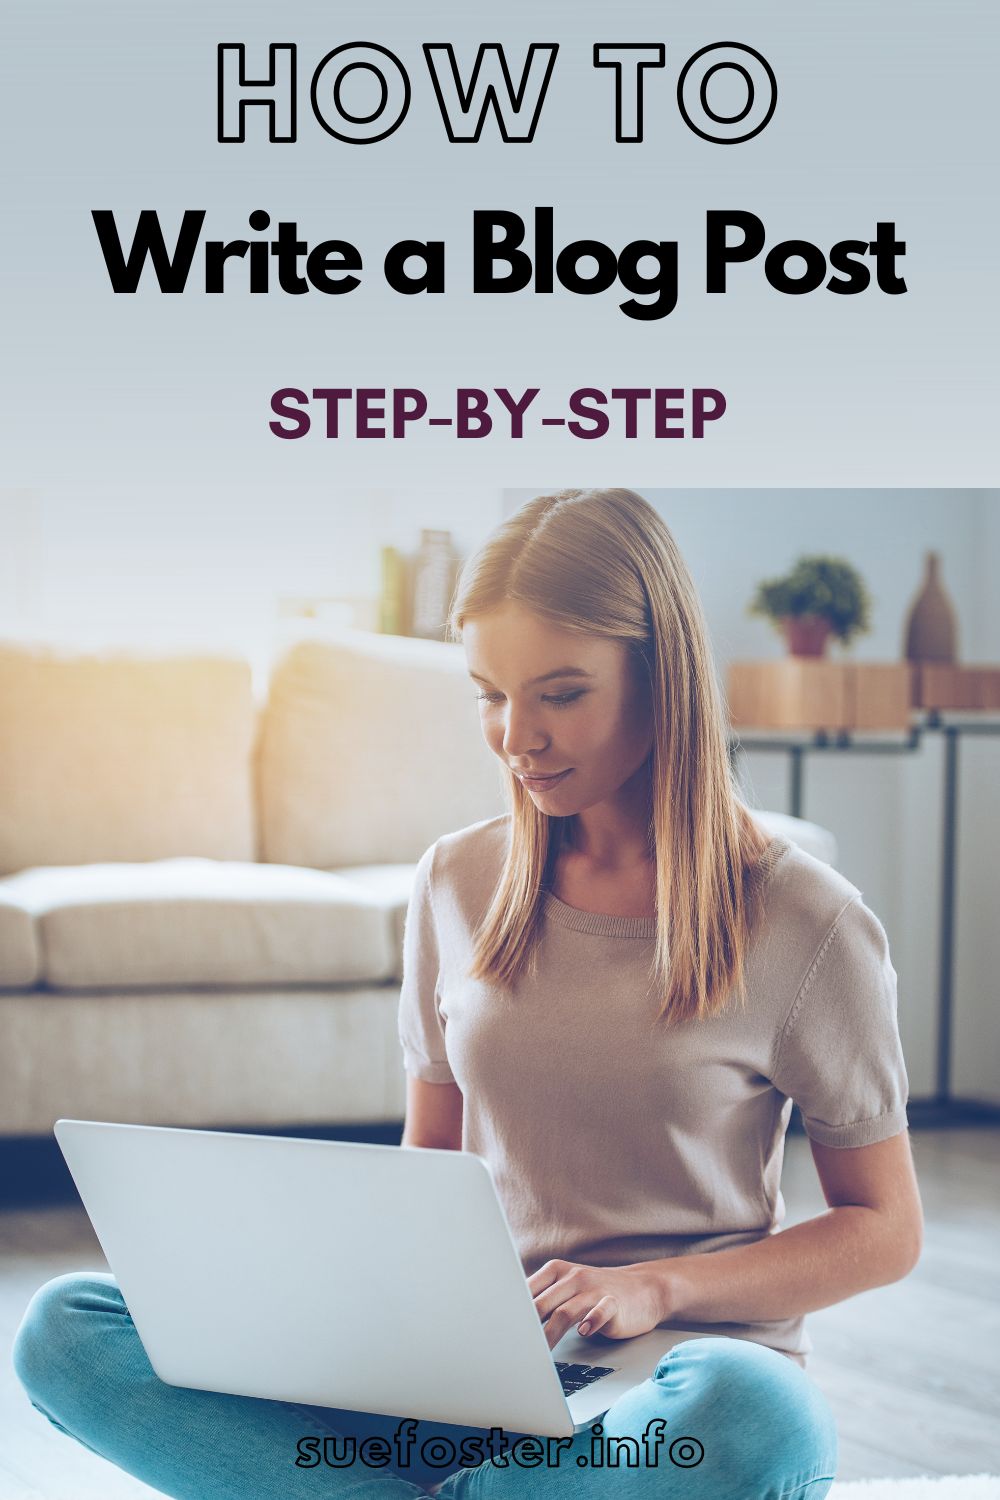 Learn to write engaging blog posts! Discover step-by-step tips on titles, intros, body, links, images, and conclusions. Start blogging confidently today.